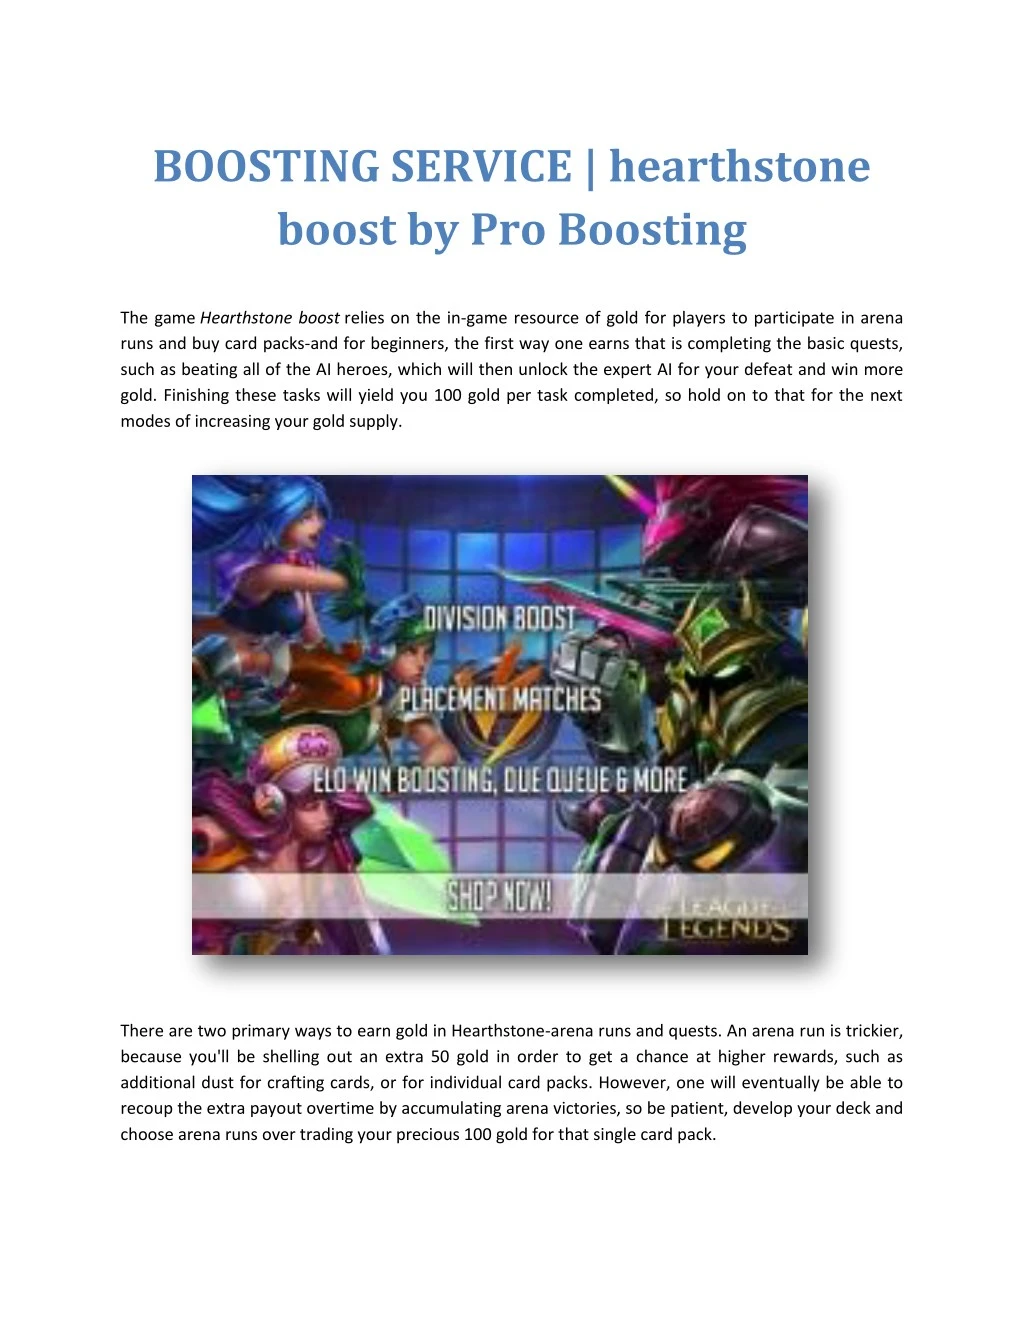 boosting service hearthstone boost by pro boosting